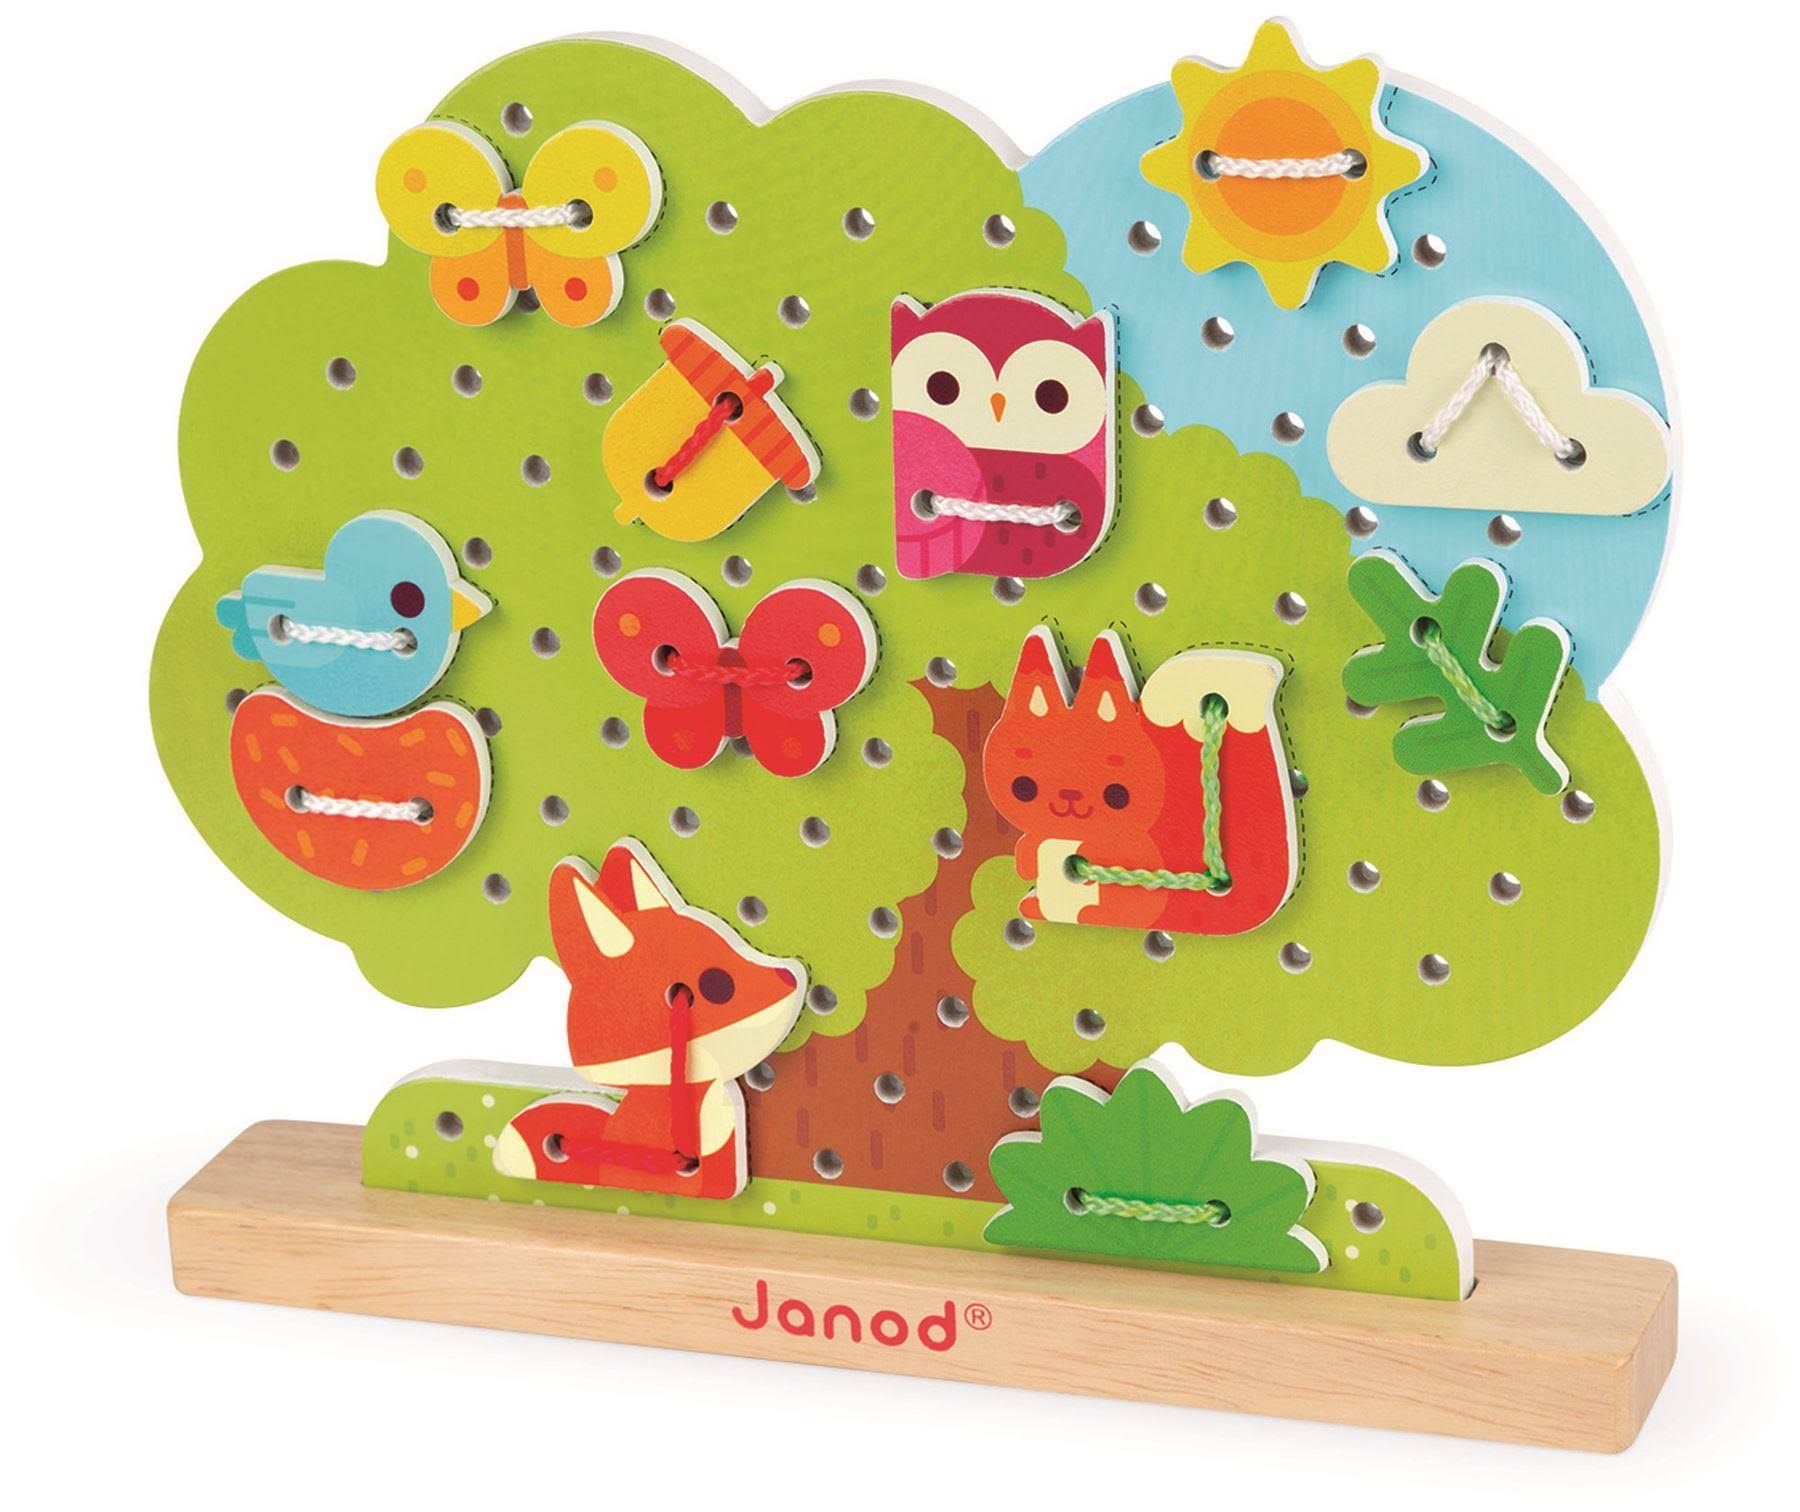 Janod J05316 Lace Up Tree Toy